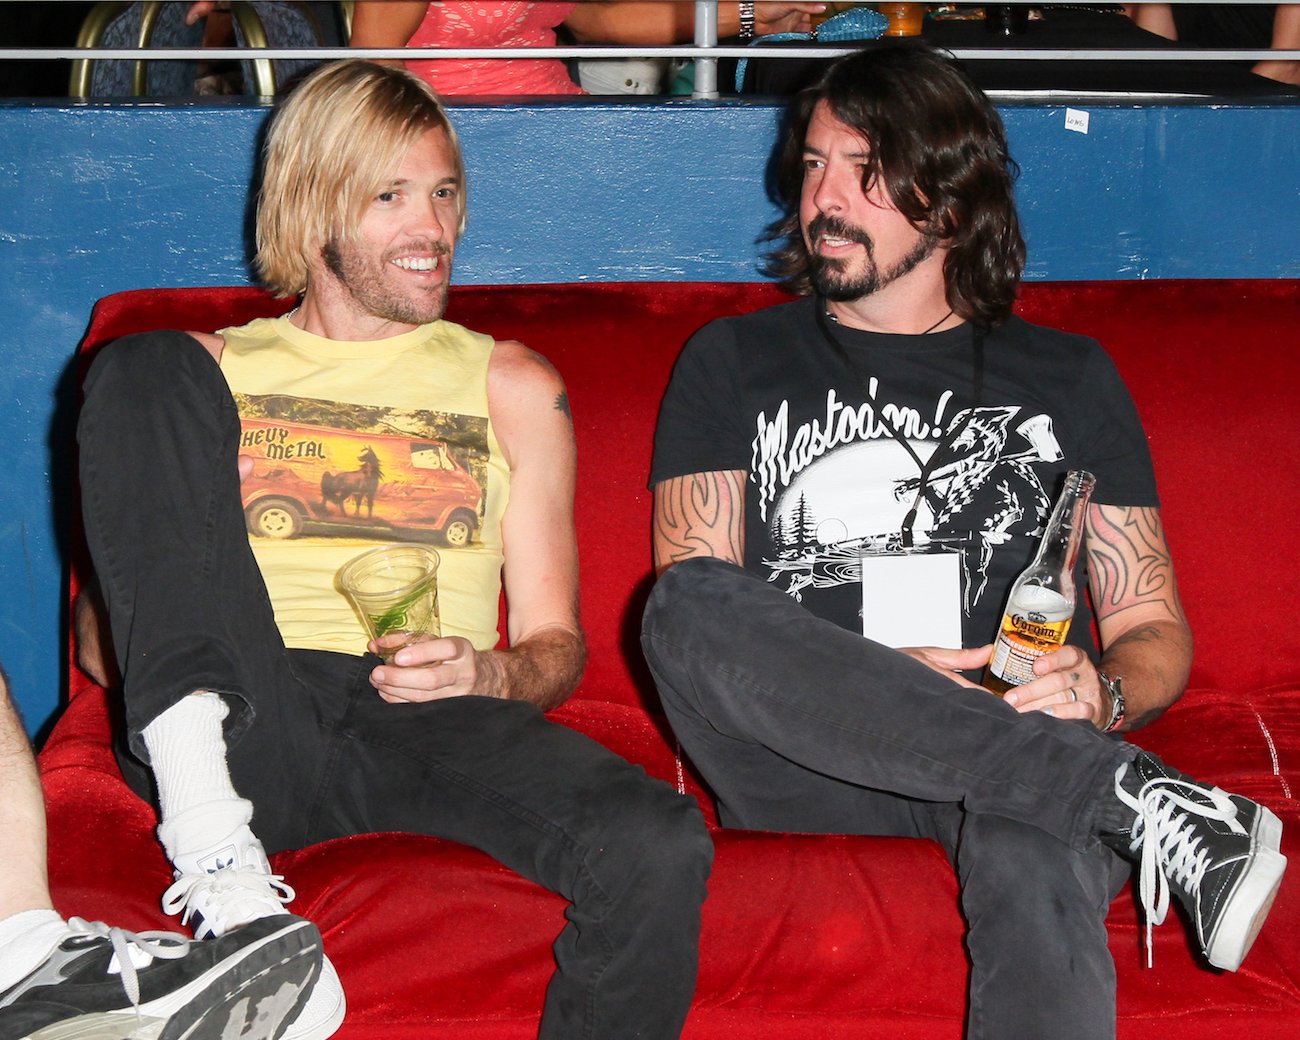 Taylor Hawkins and Dave Grohl attending the Billabong XXL Big Wave Awards in 2012.